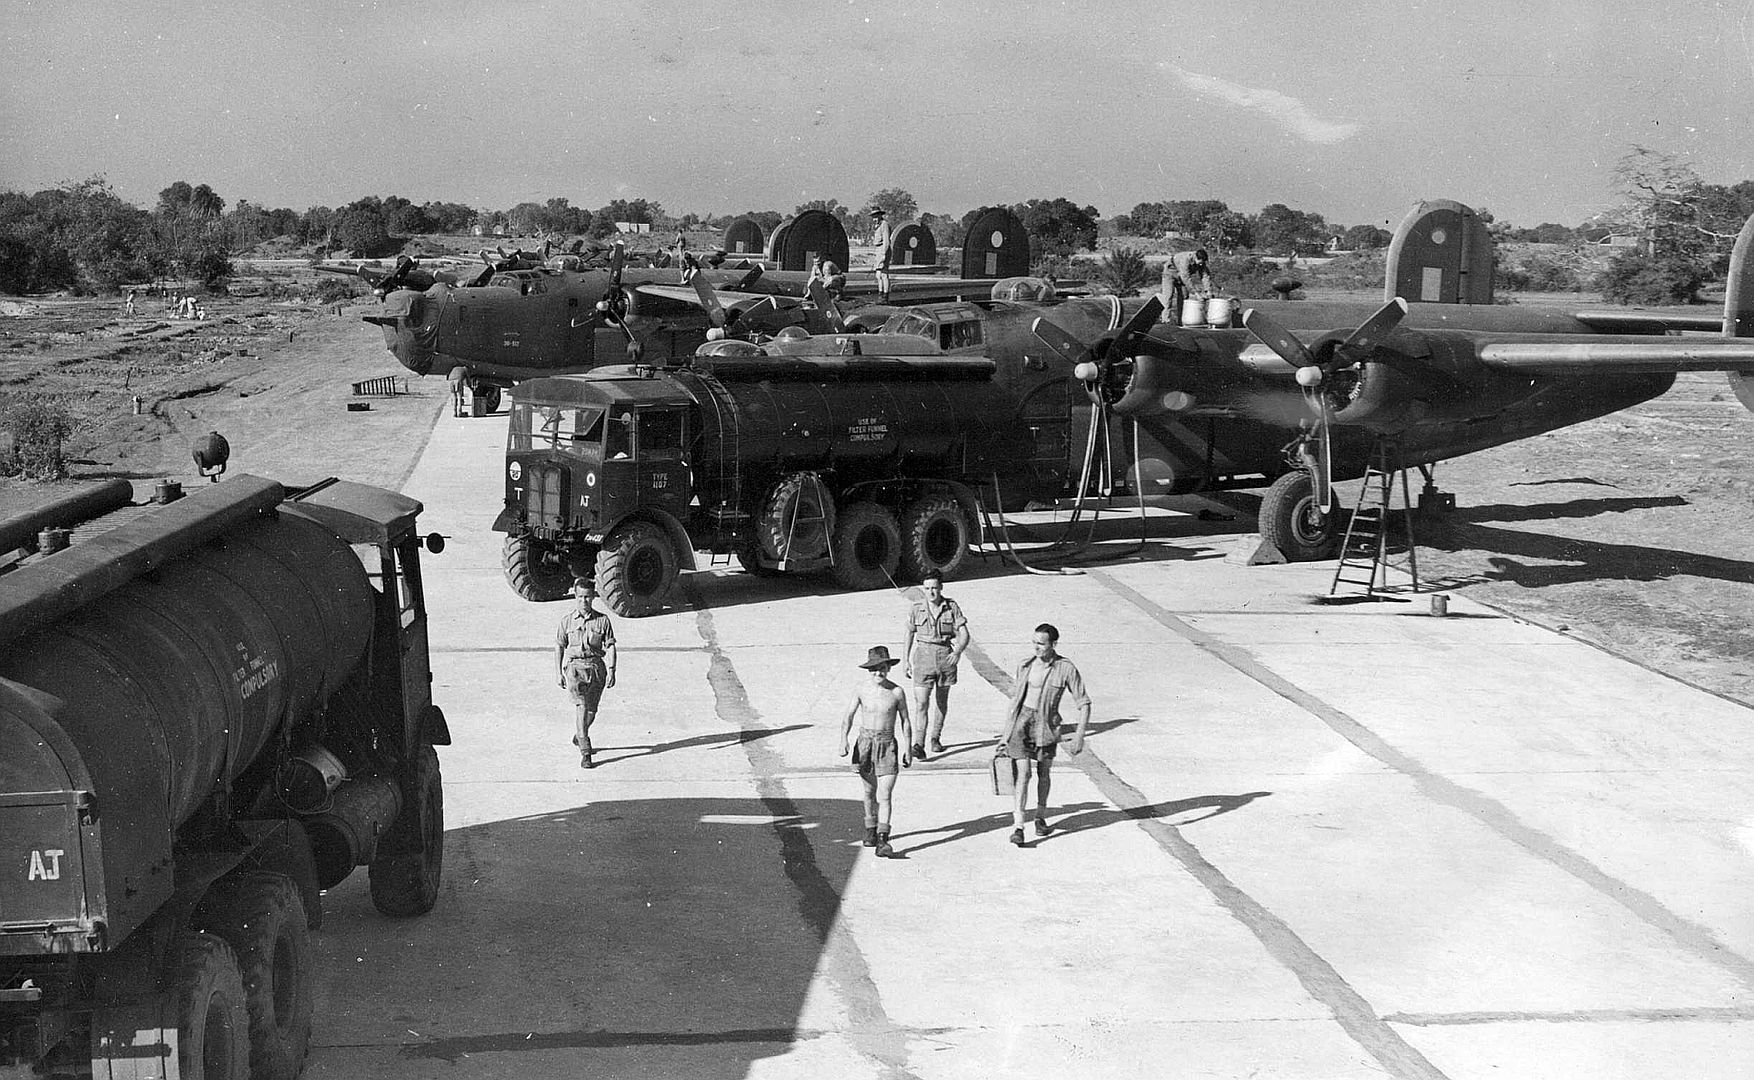  Liberators Being Refueled At A Bengal Airfield For Their Attack On Mandalay